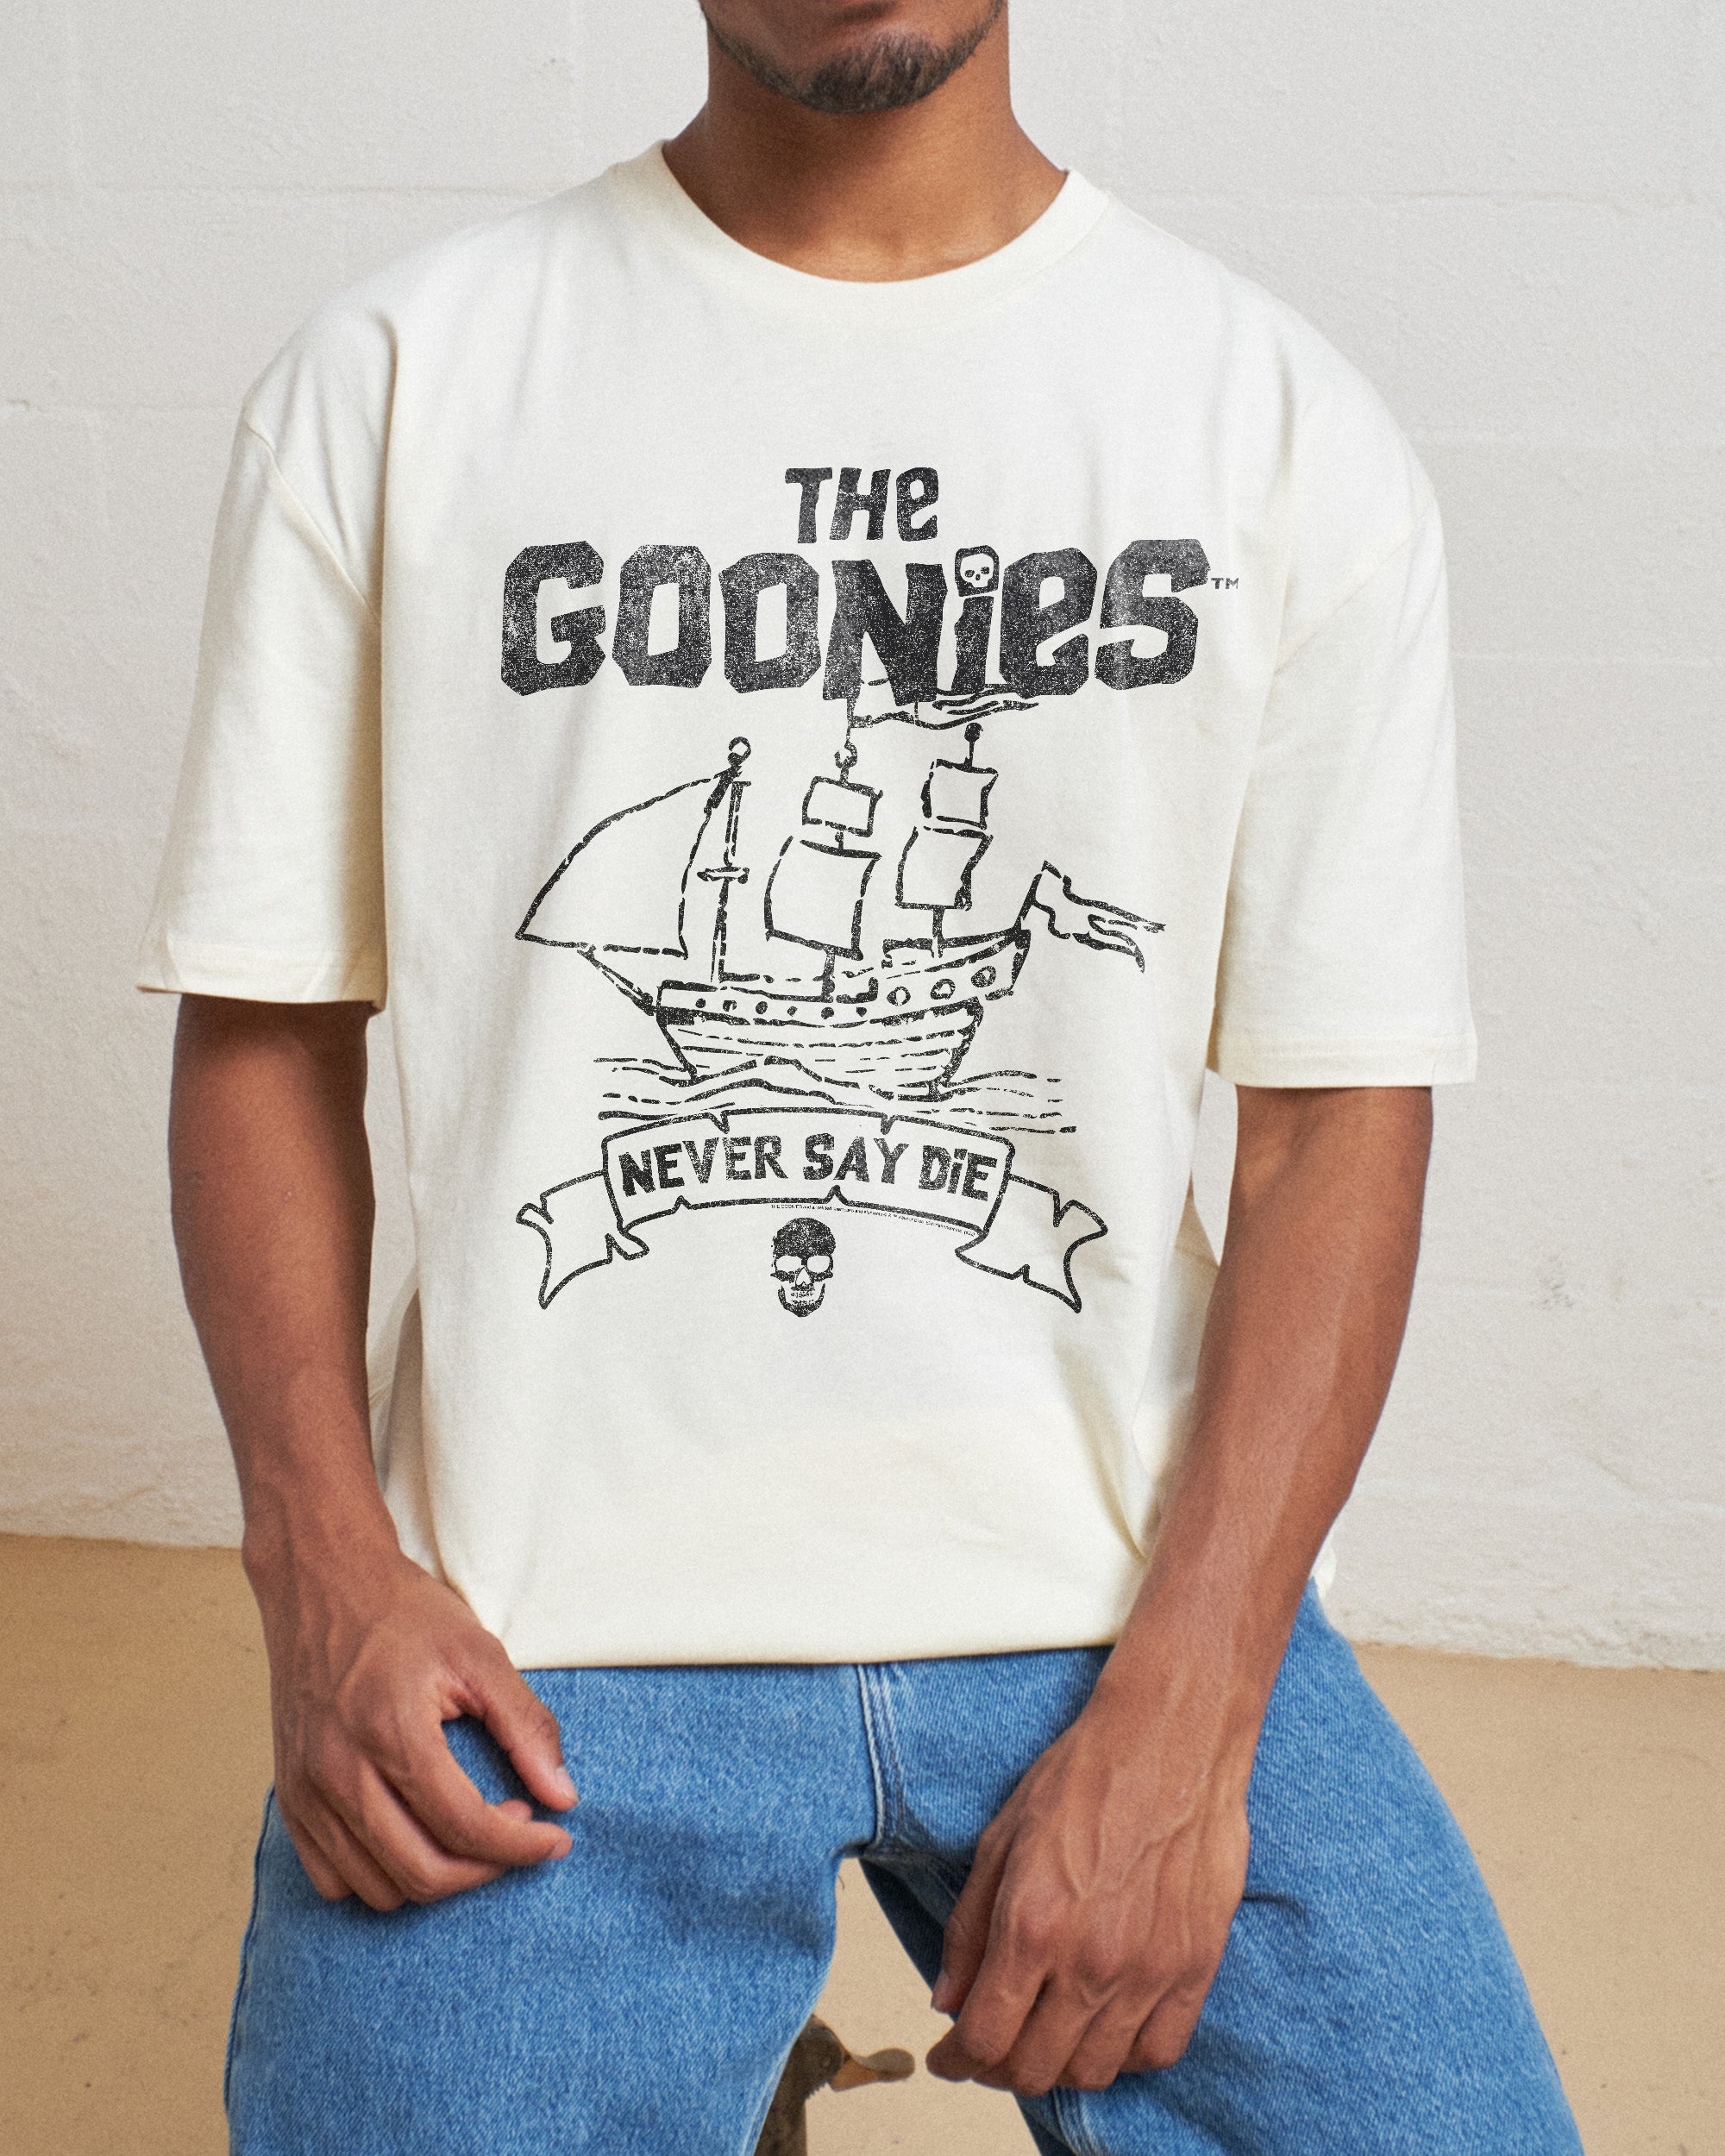 Goonies One Eyed Willie Ship T-Shirt